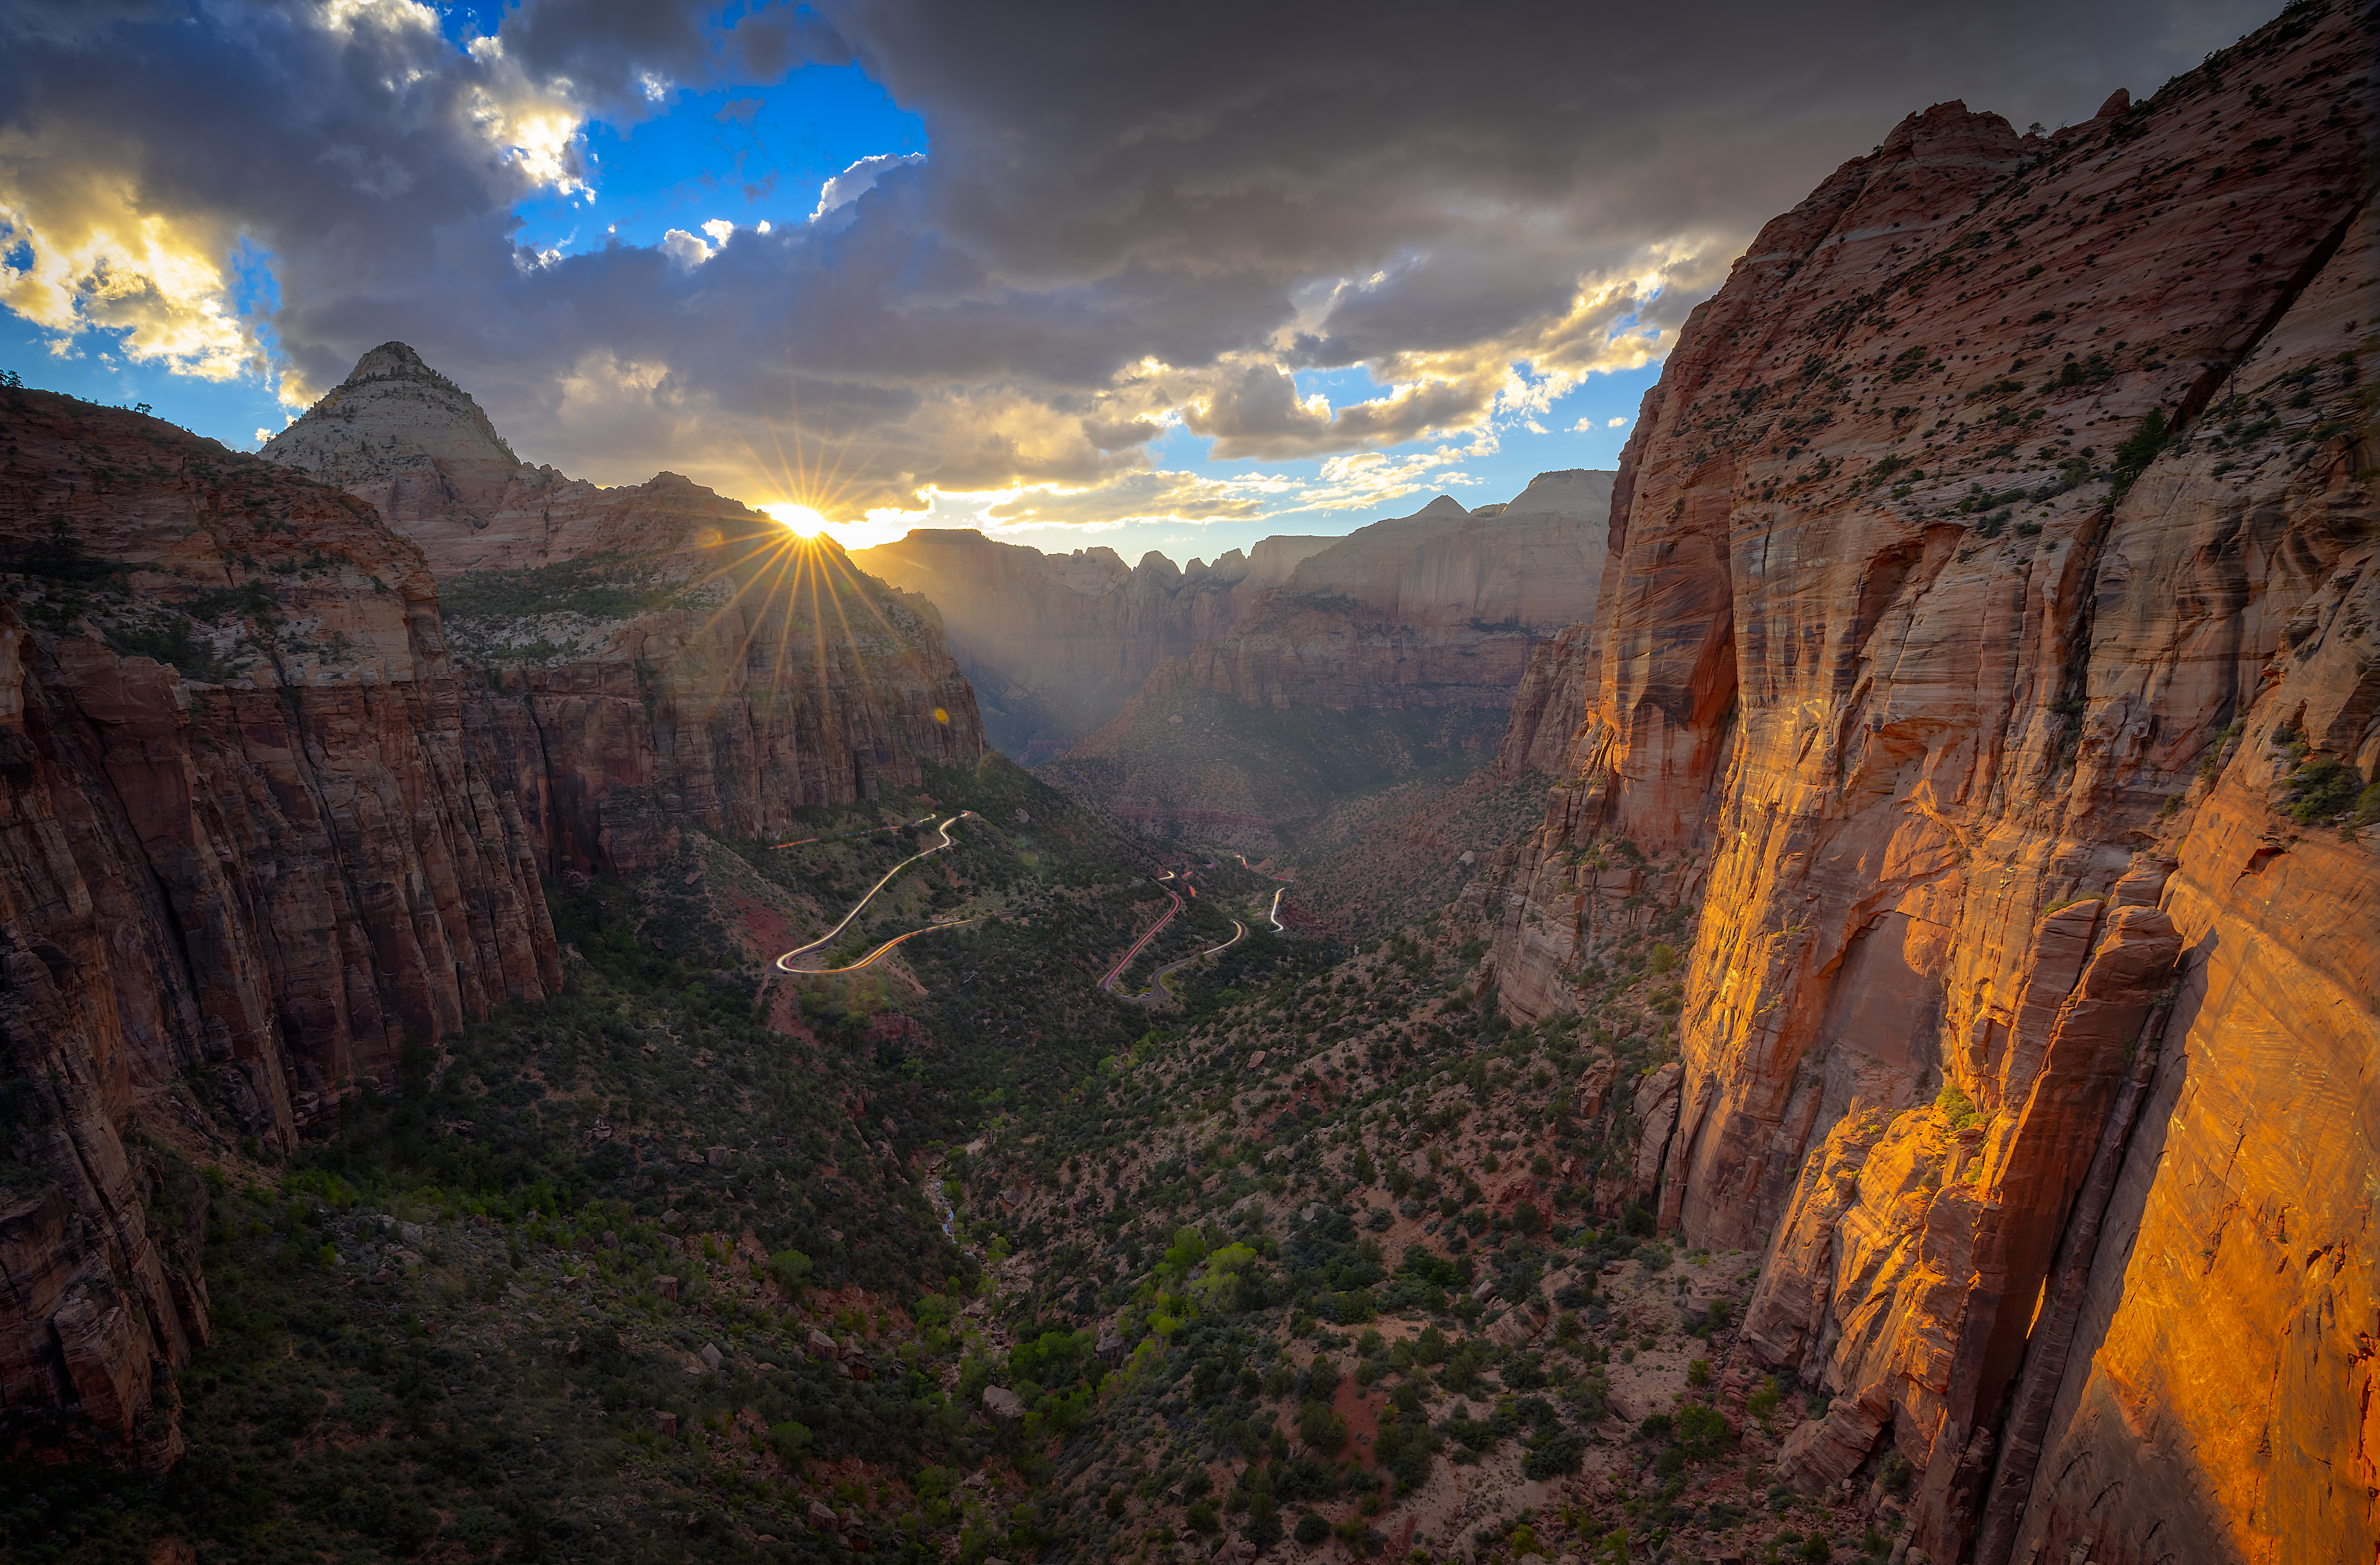 Sunset at the Overlook Trail in Zion National Park